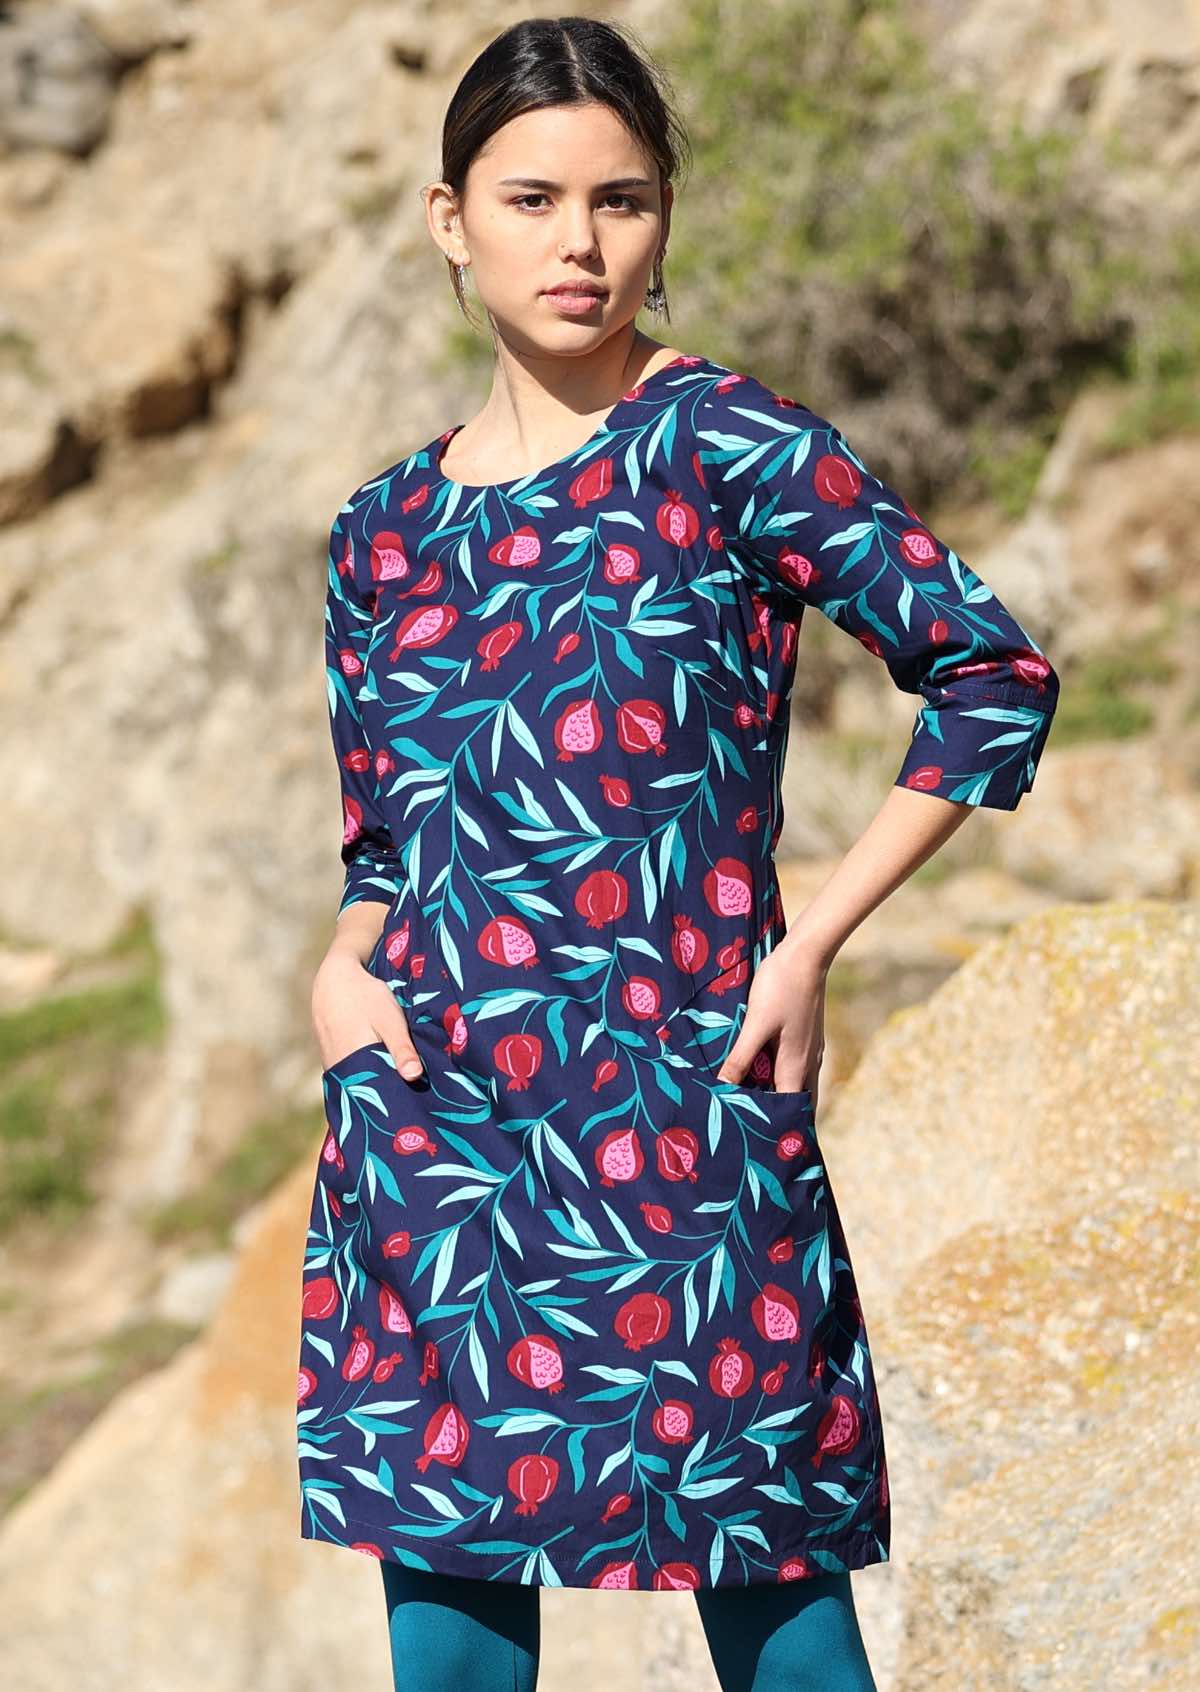 Women wears 100% cotton 3/4 sleeve dress with a blue base fruit print. The dress has a round neck line and detail on the cuff.